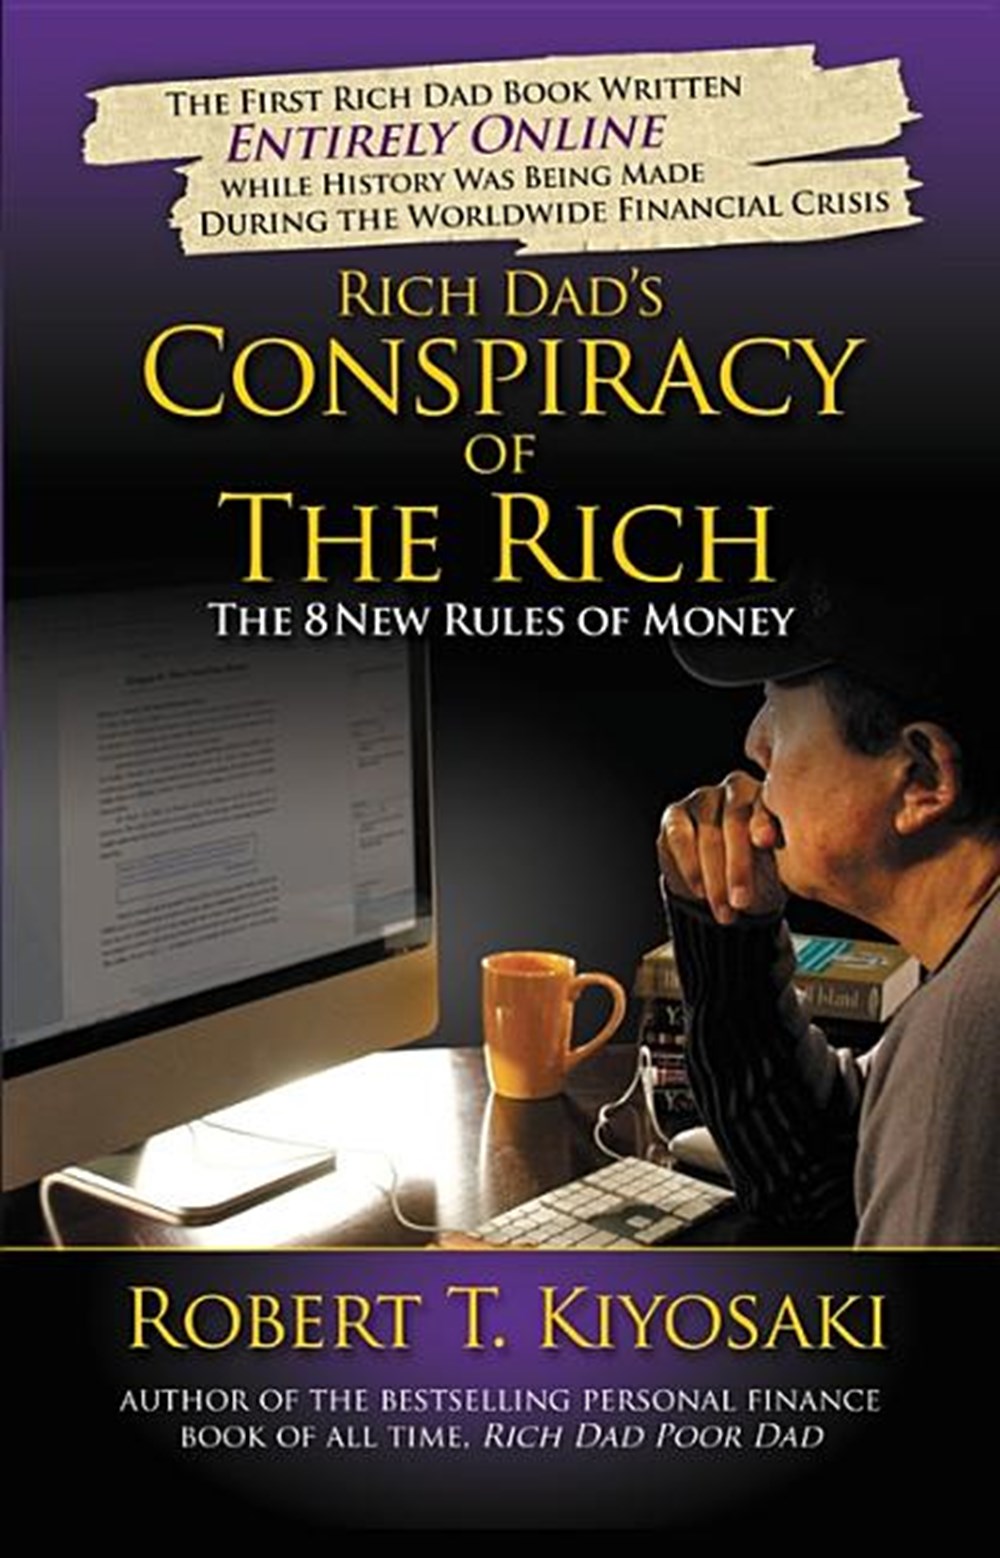 Rich Dad's Conspiracy of the Rich The 8 New Rules of Money